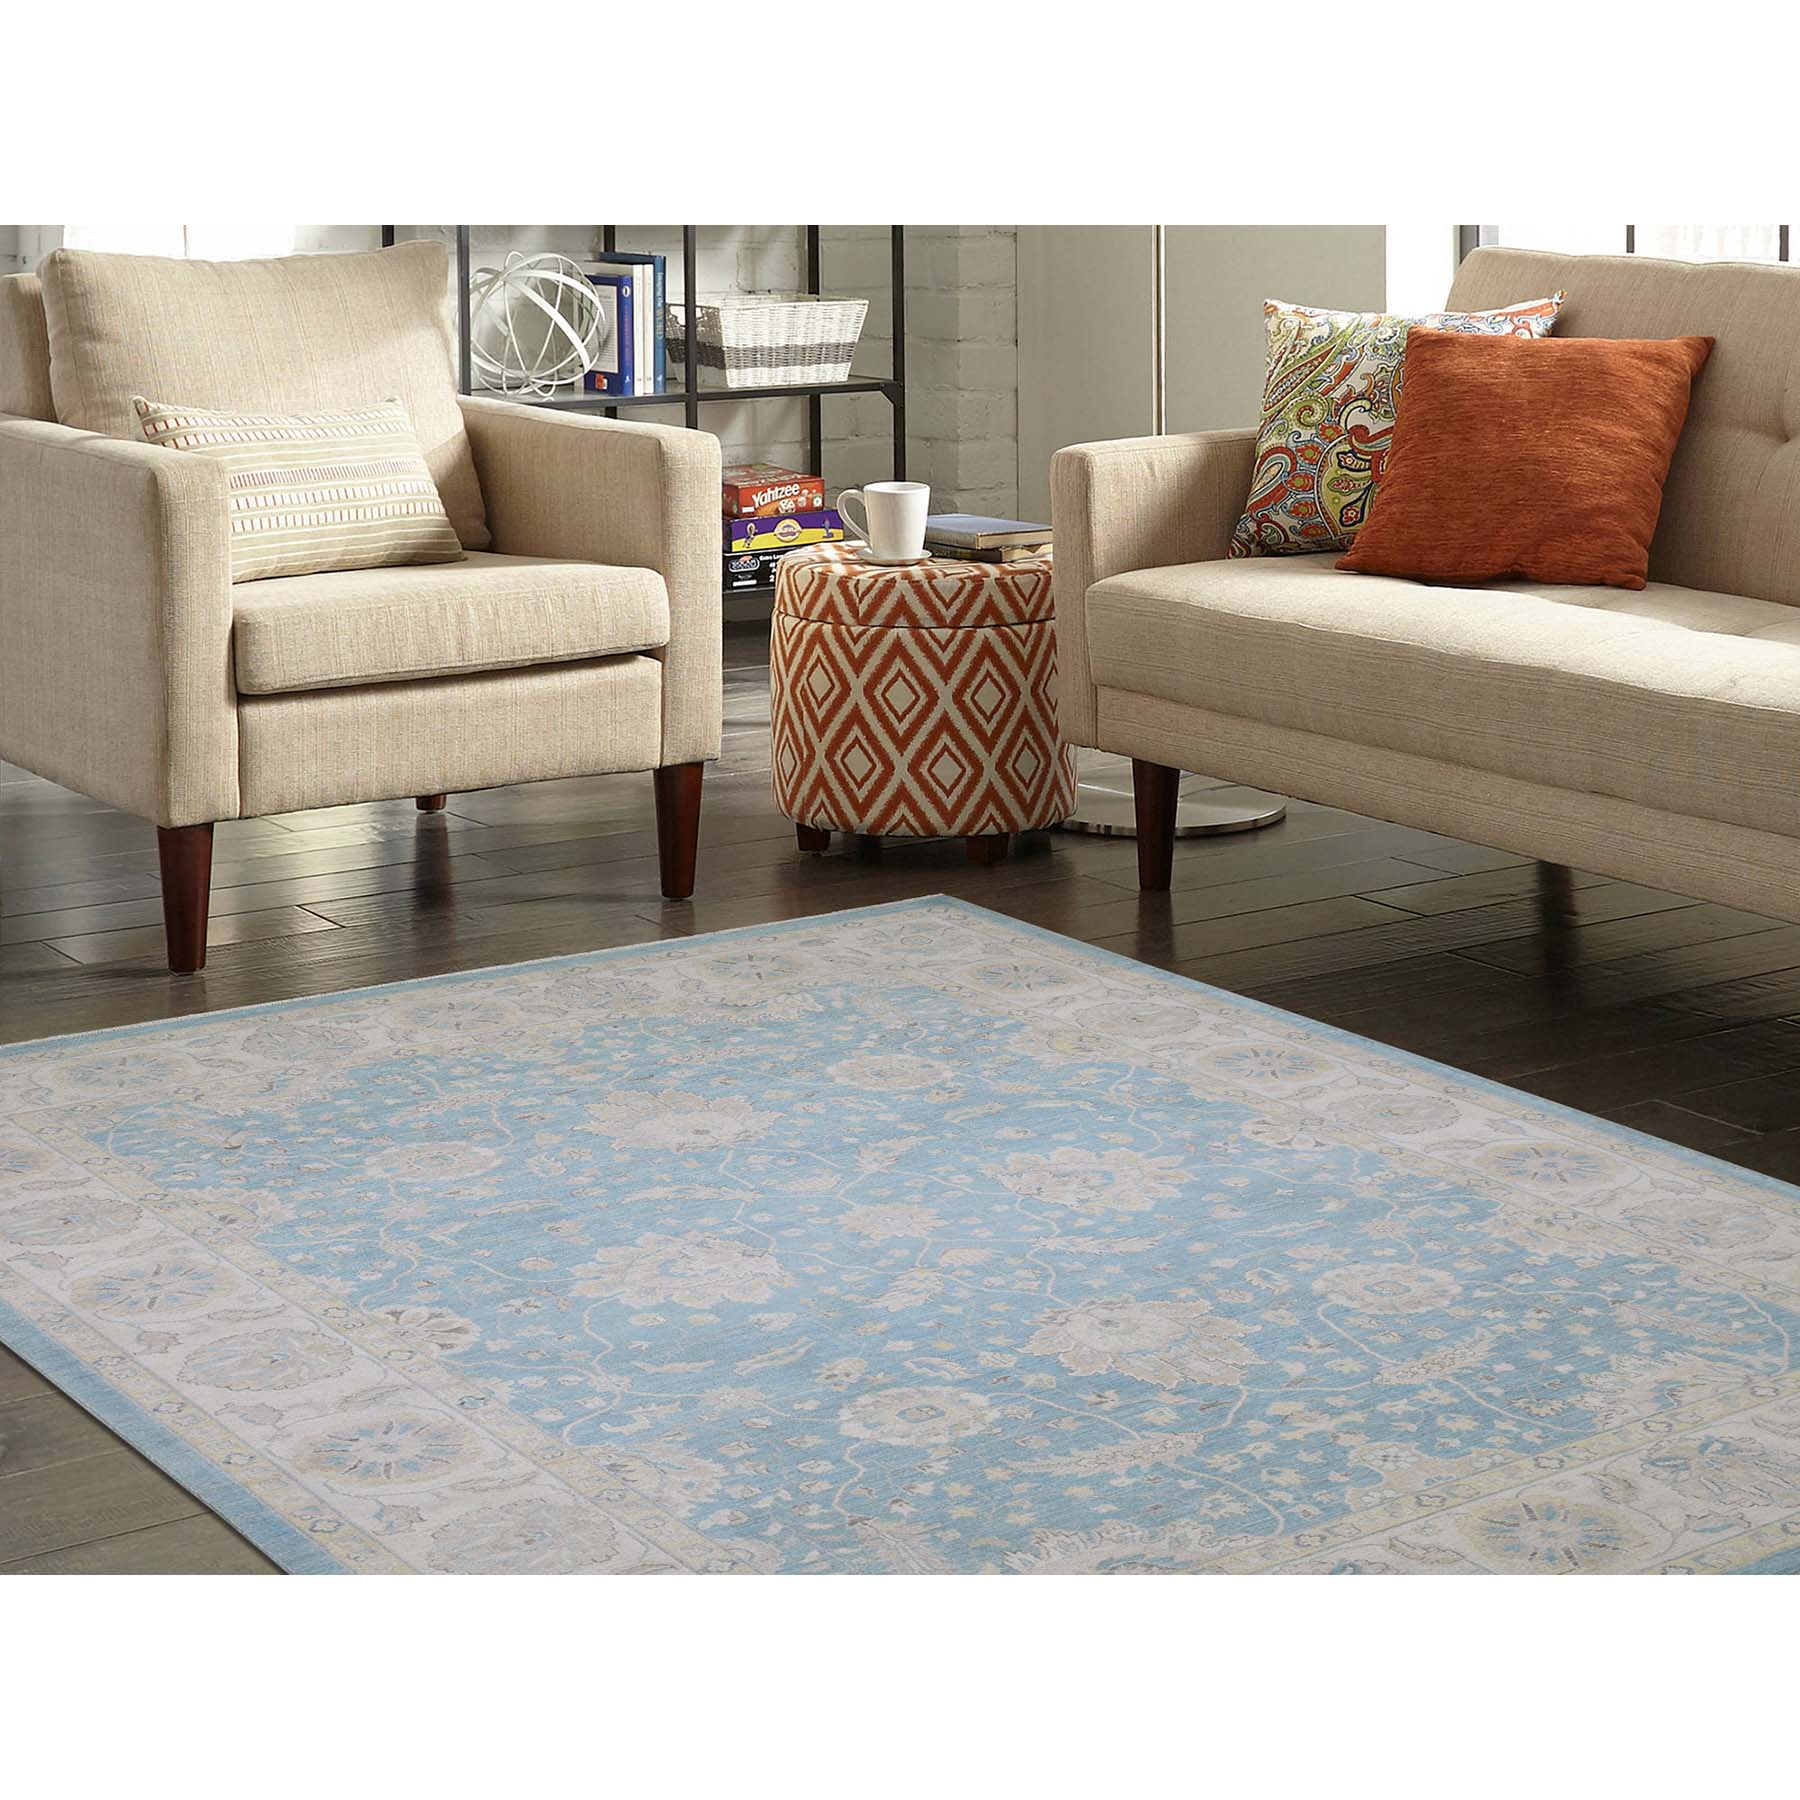 8-x9-9  Peshawar with Oushak Design Sky Blue Hand-Knotted Oriental Rug 